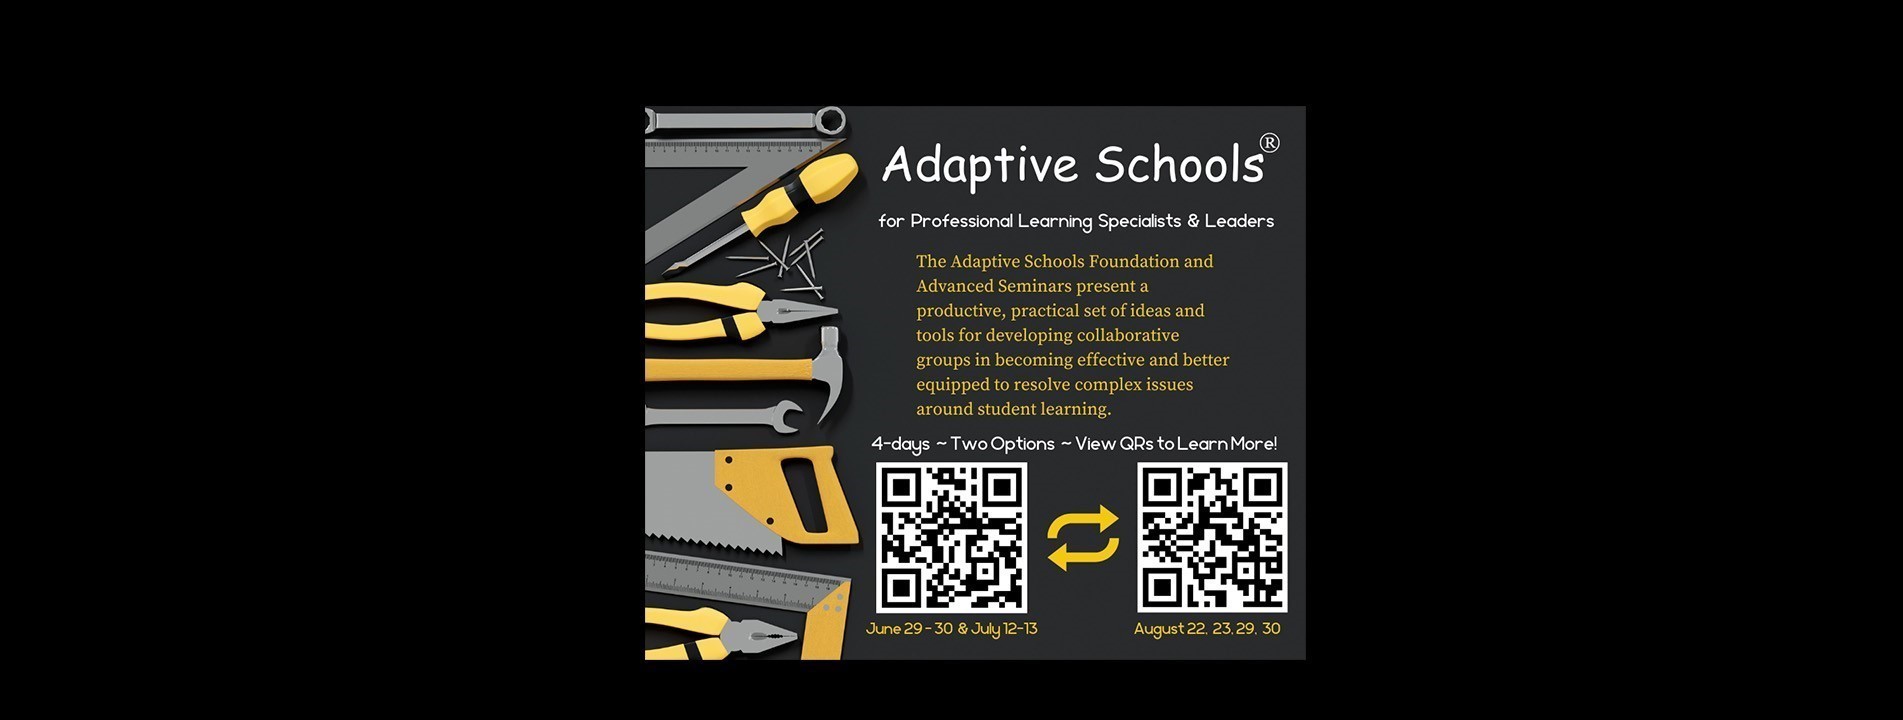 Adaptive Schools for Professional Learning Specialists & Leaders. The Adaptive Schools Foundation and Advanced Seminars present a productive, practical set of ideas and tools for developing collaborative groups in becoming effective and better equipped to resolve complex issues around student learning. 4 days. Two Options. View QR Codes to Learn More! June 29, June 30, July 12, July 13 or August 22, 23, 29, and 30